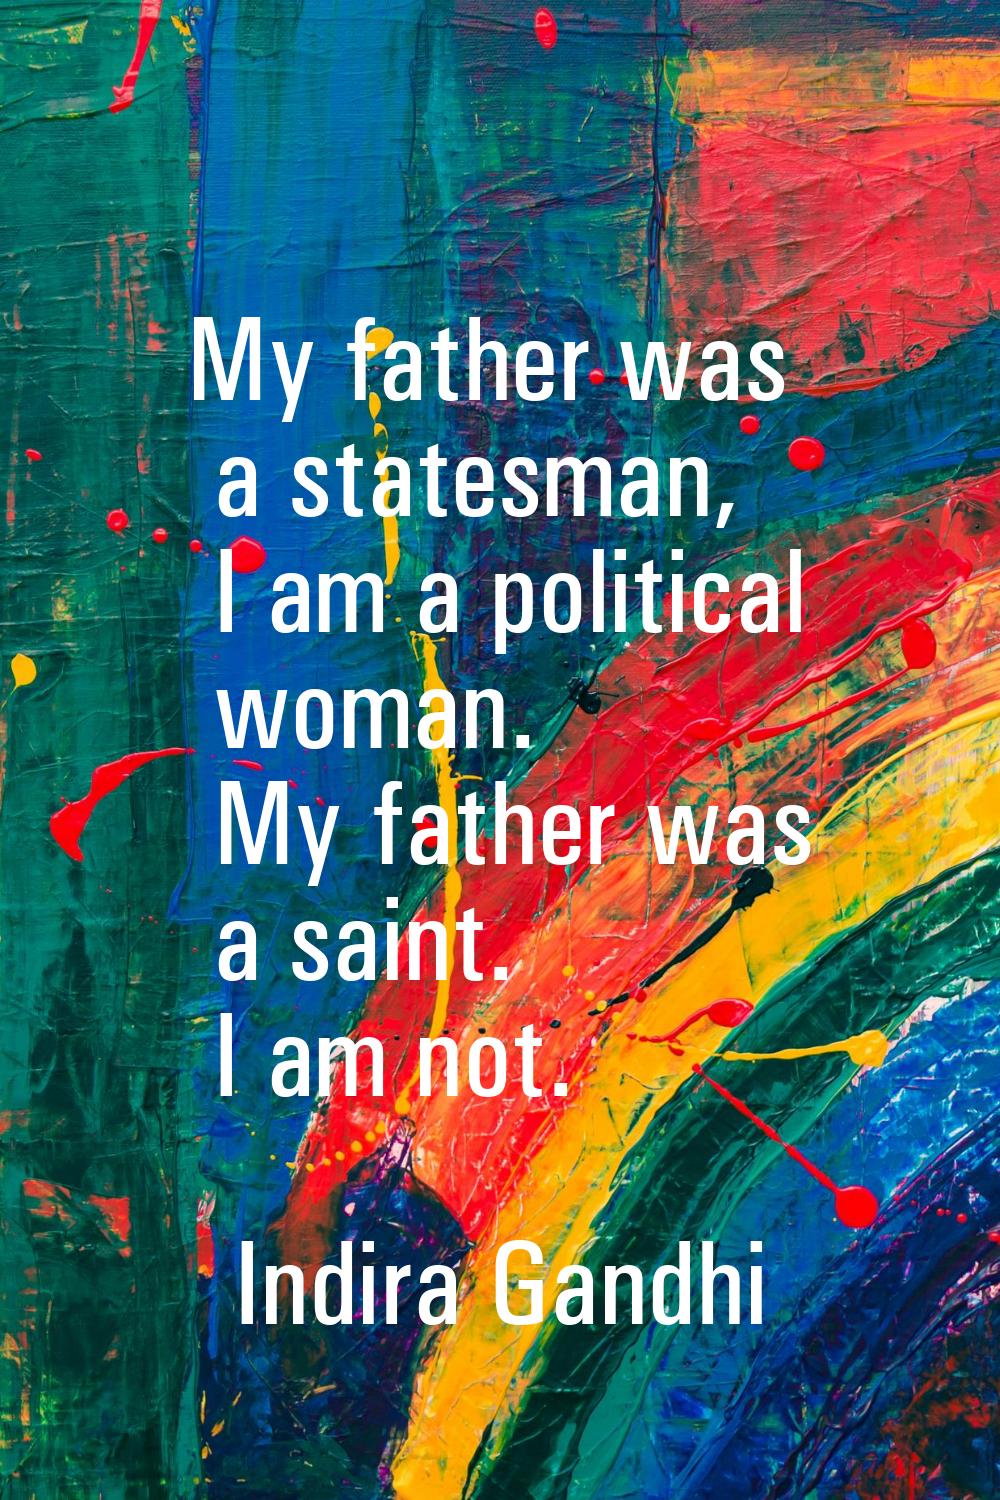 My father was a statesman, I am a political woman. My father was a saint. I am not.